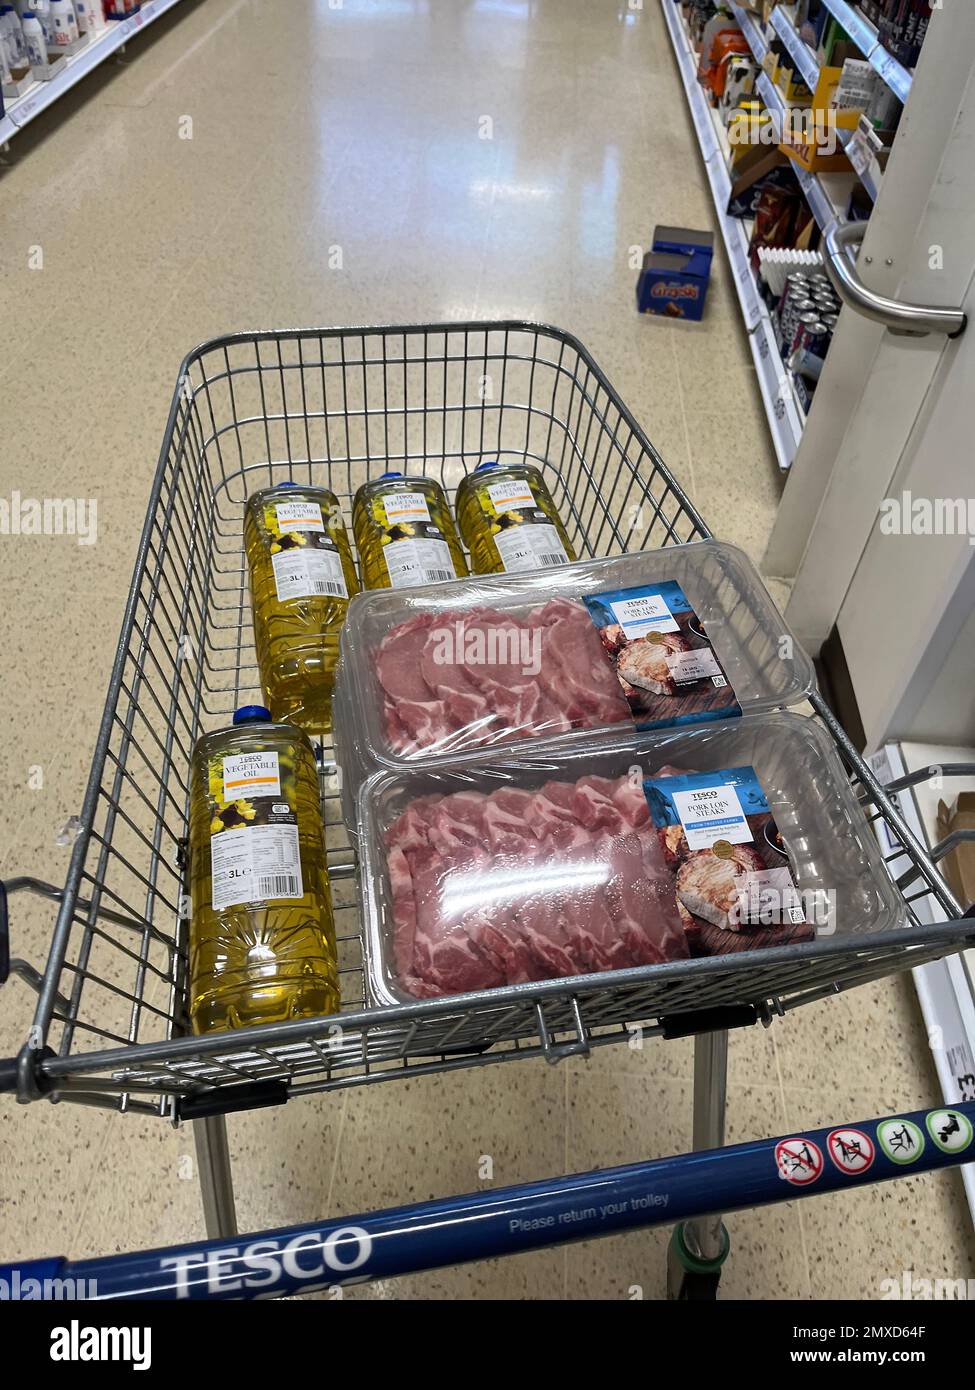 https://c8.alamy.com/comp/2MXD64F/tesco-trolly-with-meat-and-oil-for-a-small-business-oxford-uk-jan-2023-2MXD64F.jpg